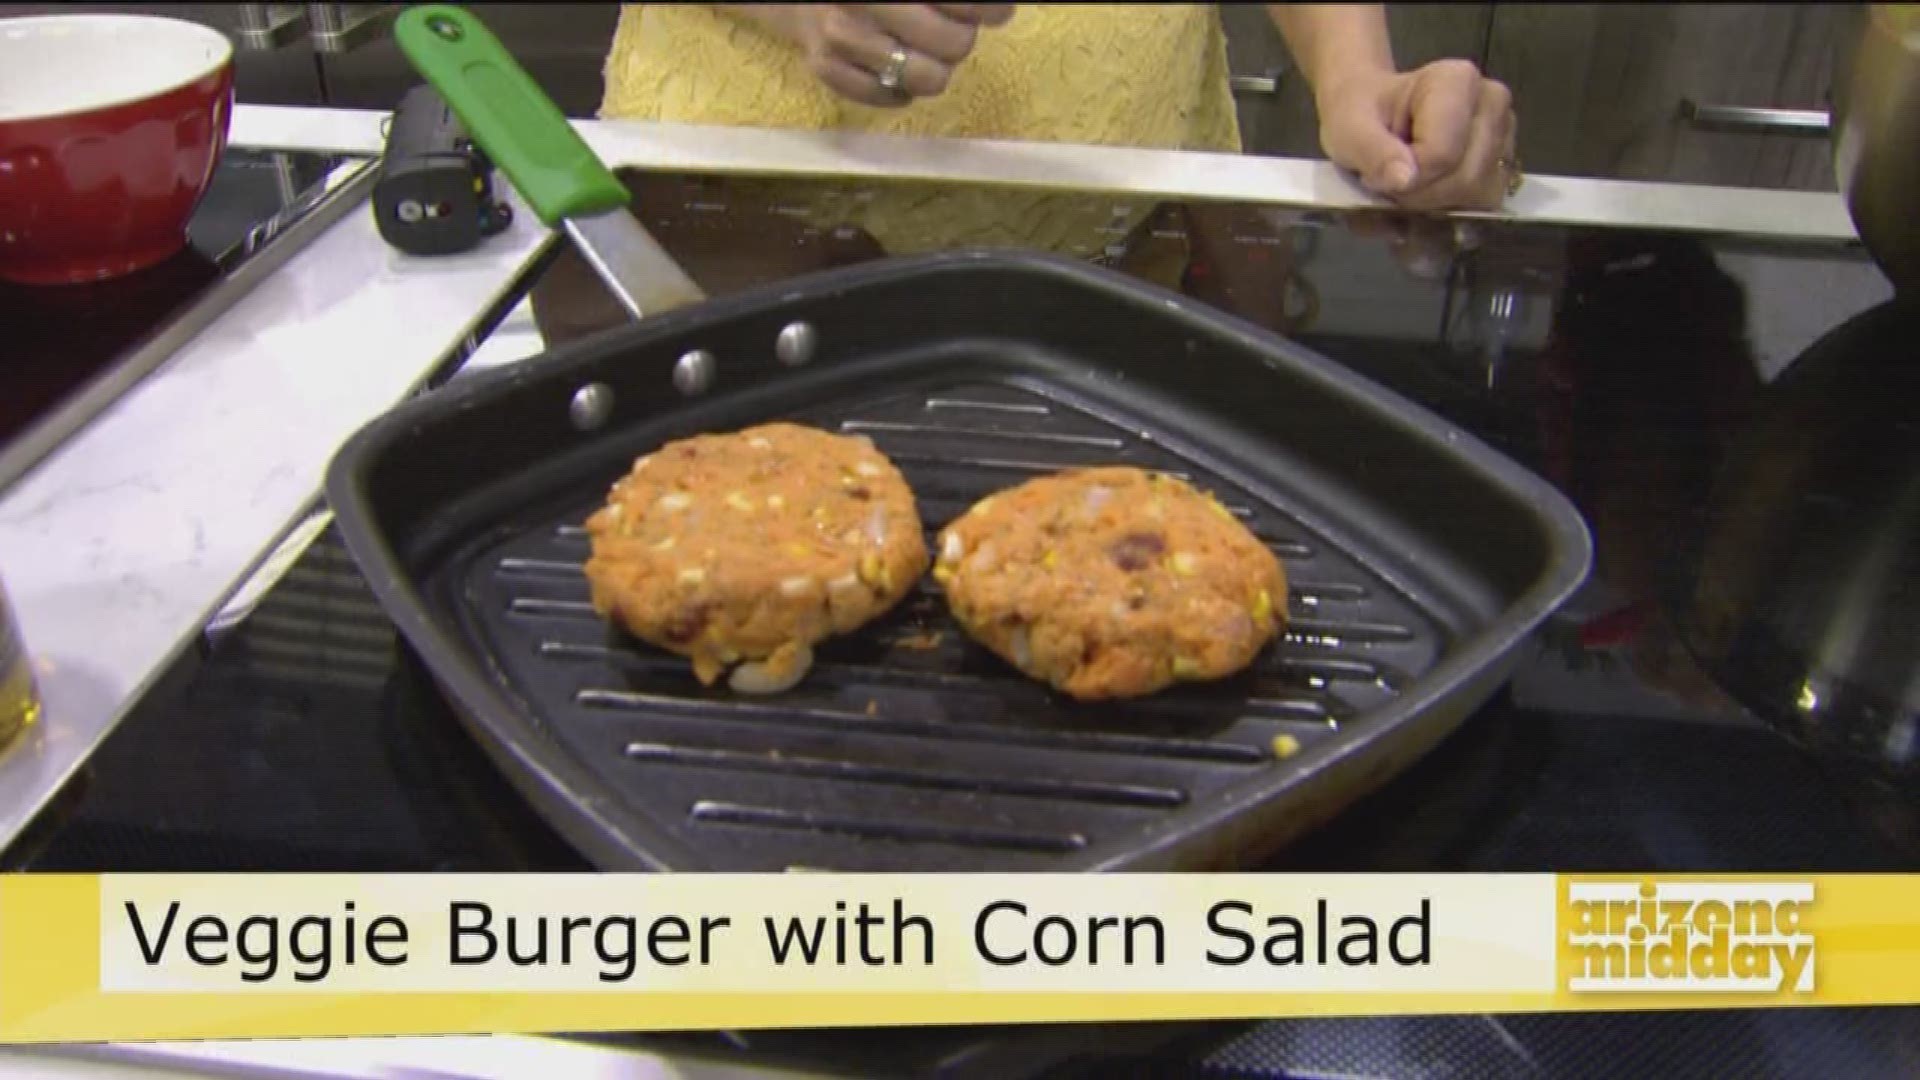 Chef Nikita Bhuyan shows us how to make a delicious and healthy veggie burger and a fresh corn salad.